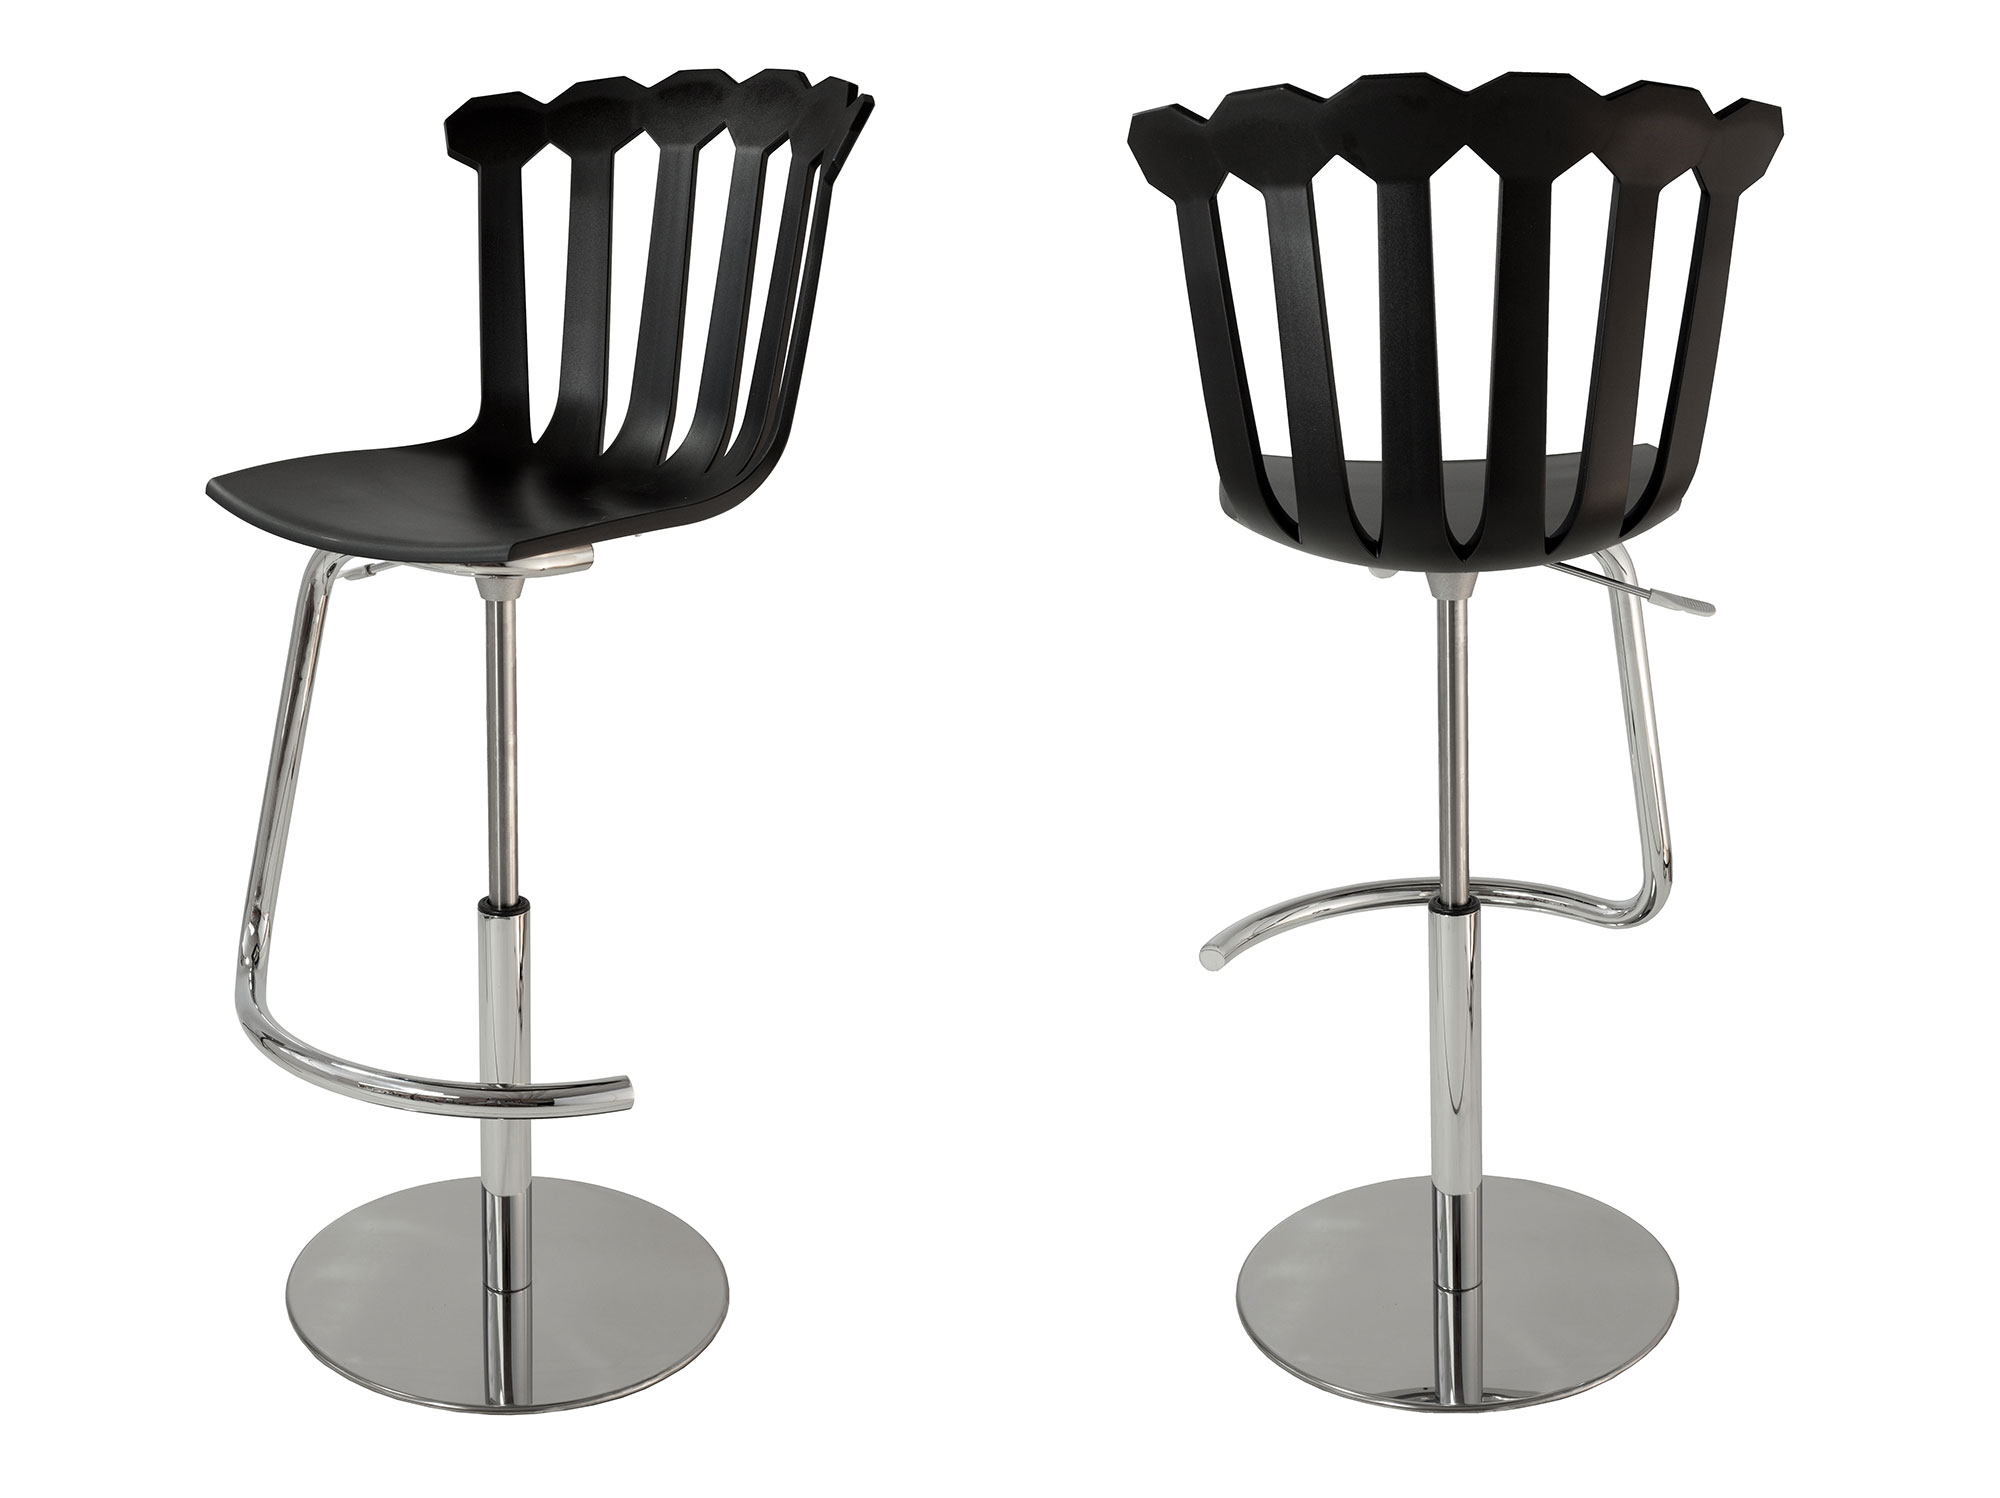 Tulip, entirely handcrafted in Italy, is an original adjustable bar stool, available in 3 different colours. Shop now for metal bar stool, made in Italy.